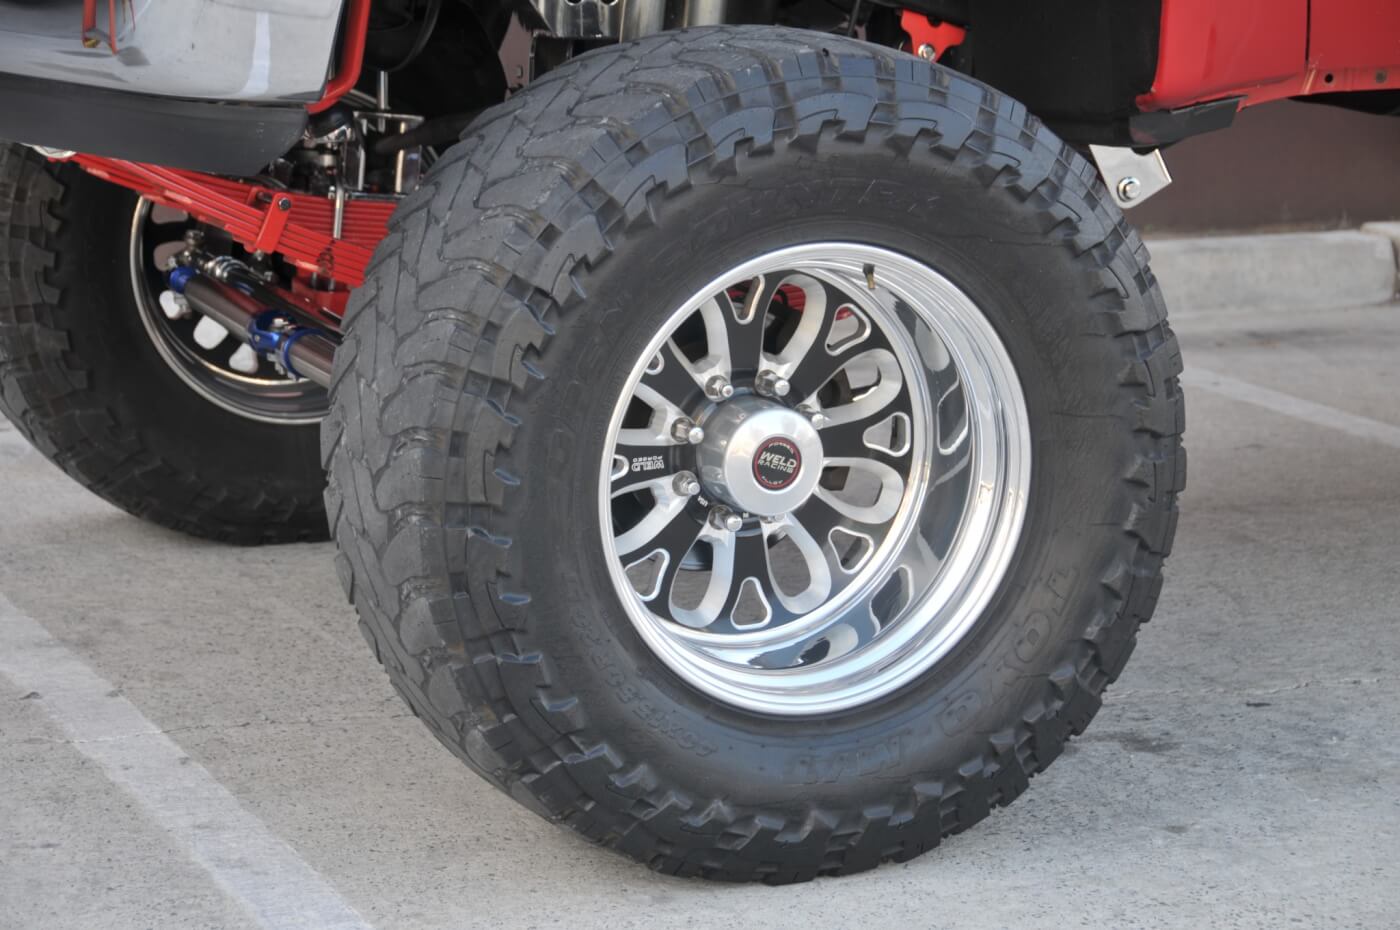 The Weld Racing T58 wheels are 20 inches in diameter.